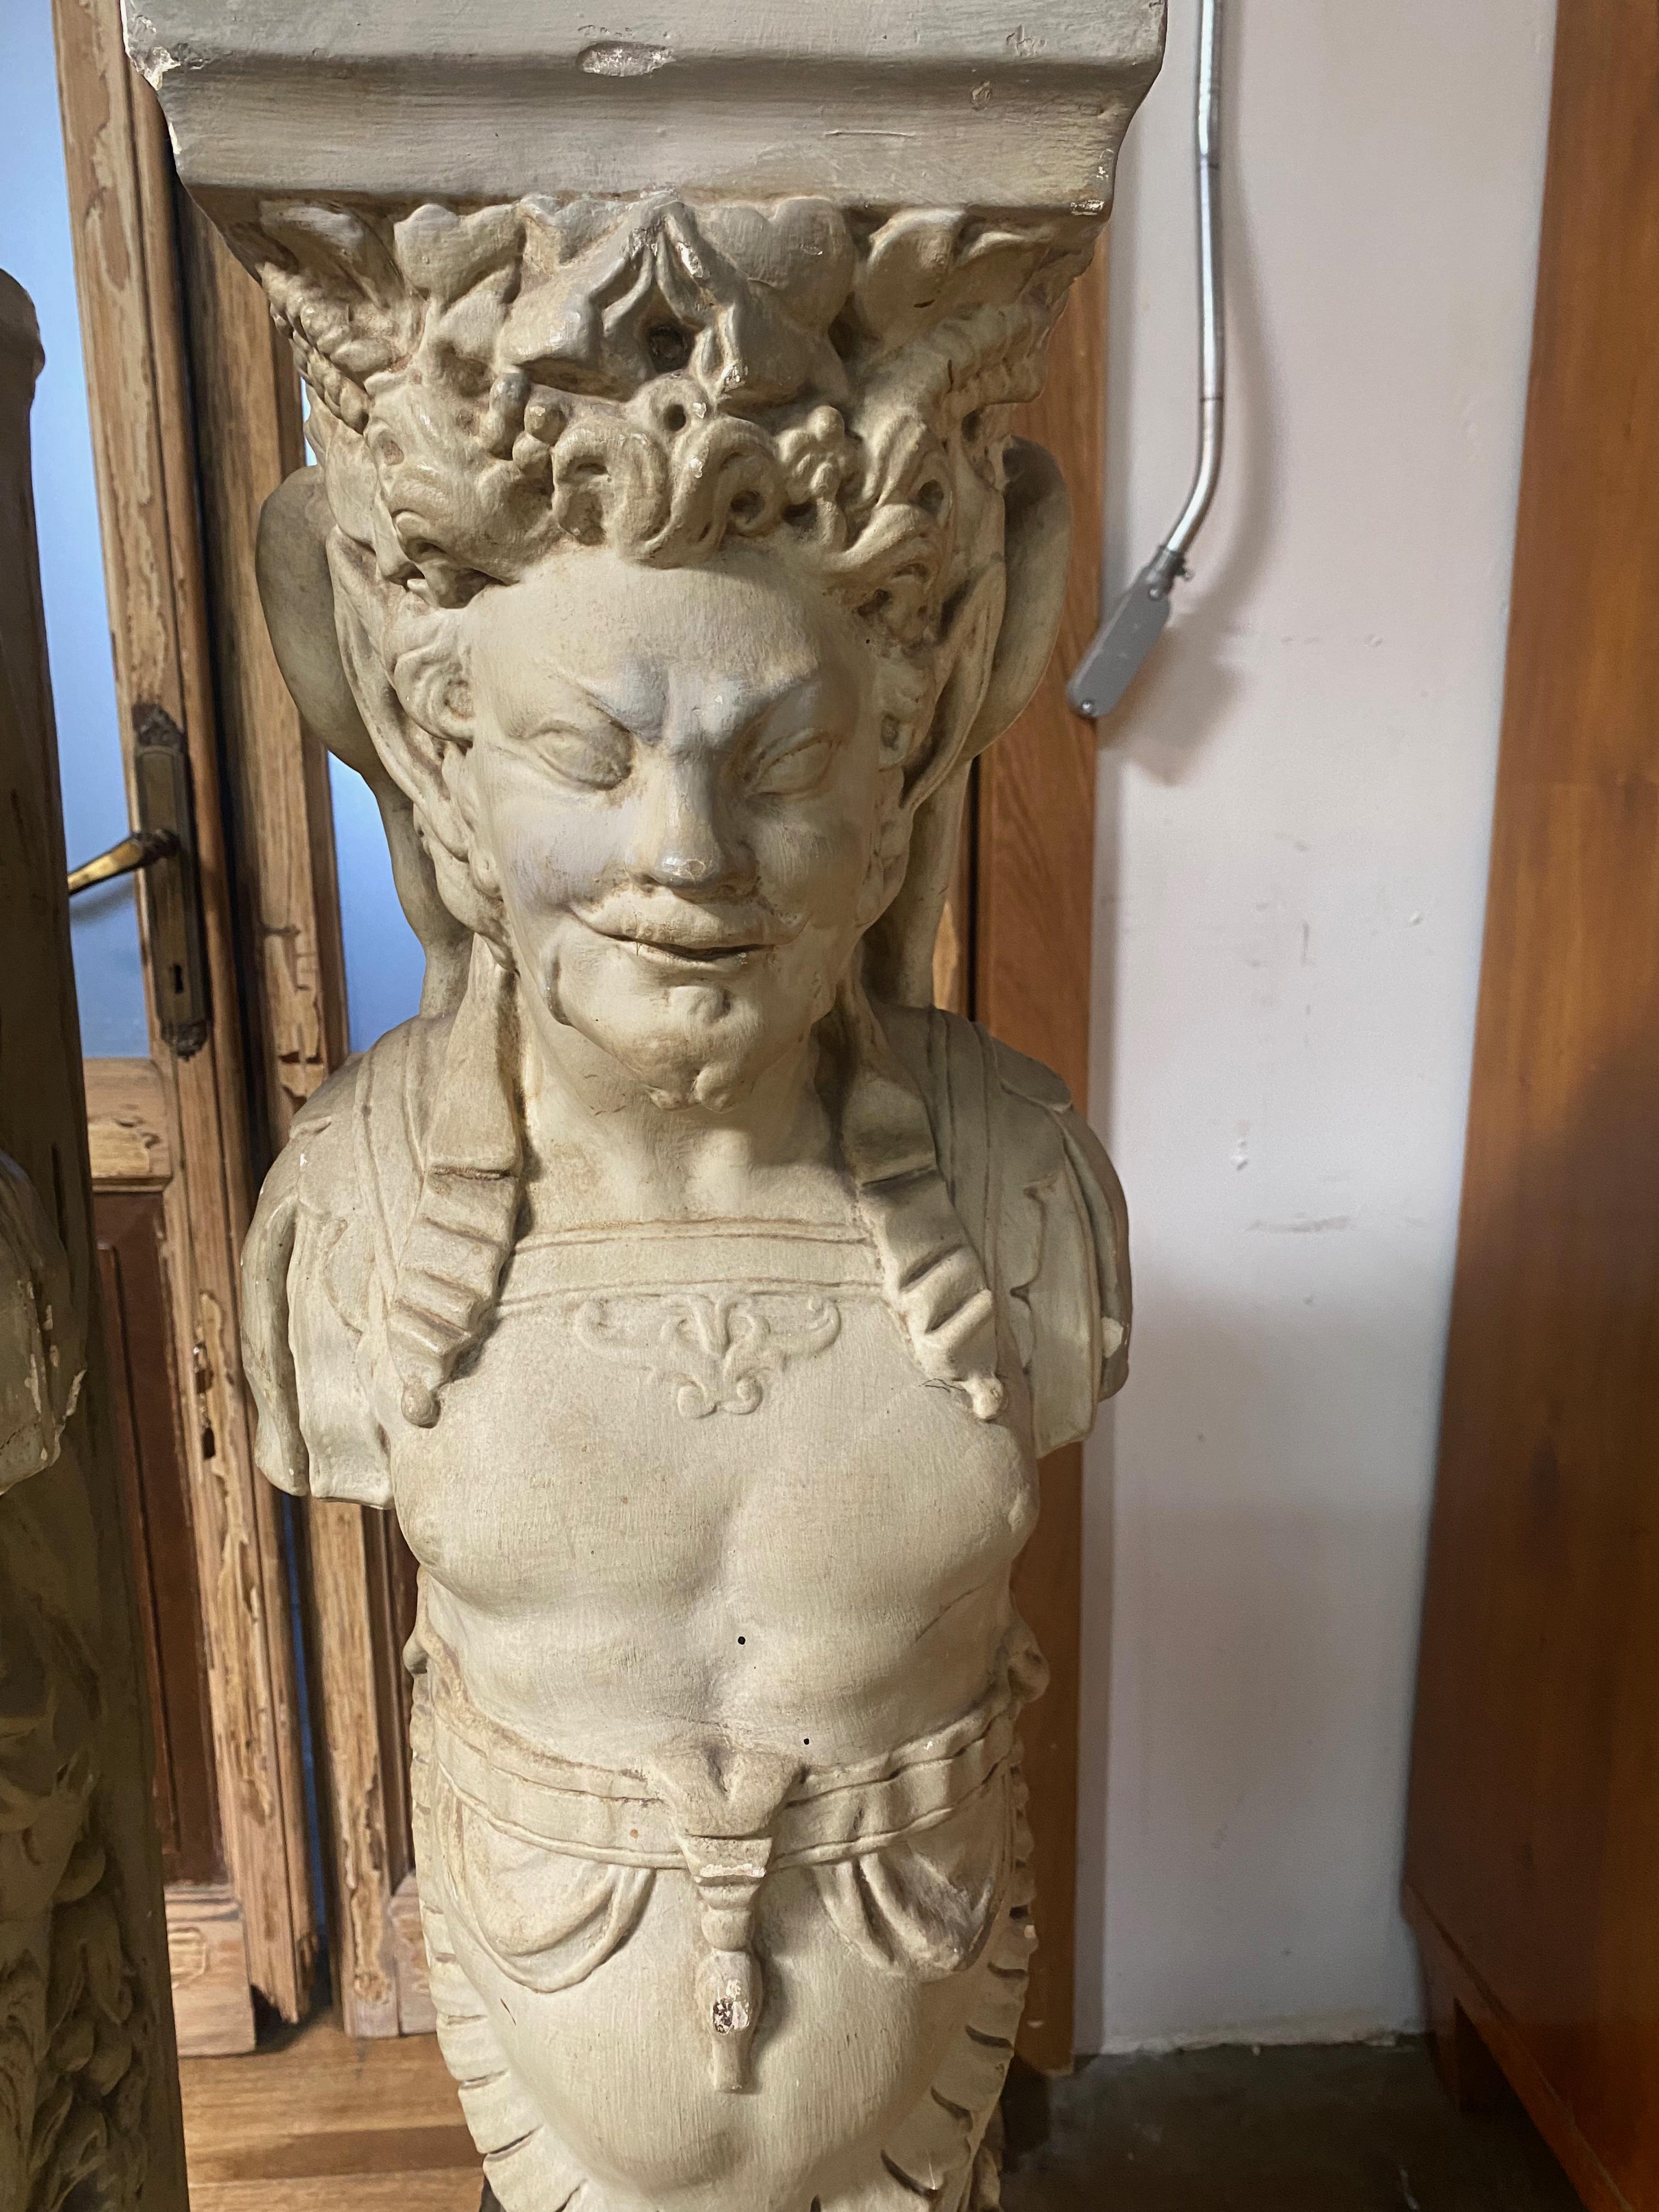 Introducing a pair of exceptional 19th century plaster fireguards, inspired by the elegant and ornate style of the Renaissance period. These fireguards are a true testament to the sophistication and craftsmanship of the era, carefully crafted by